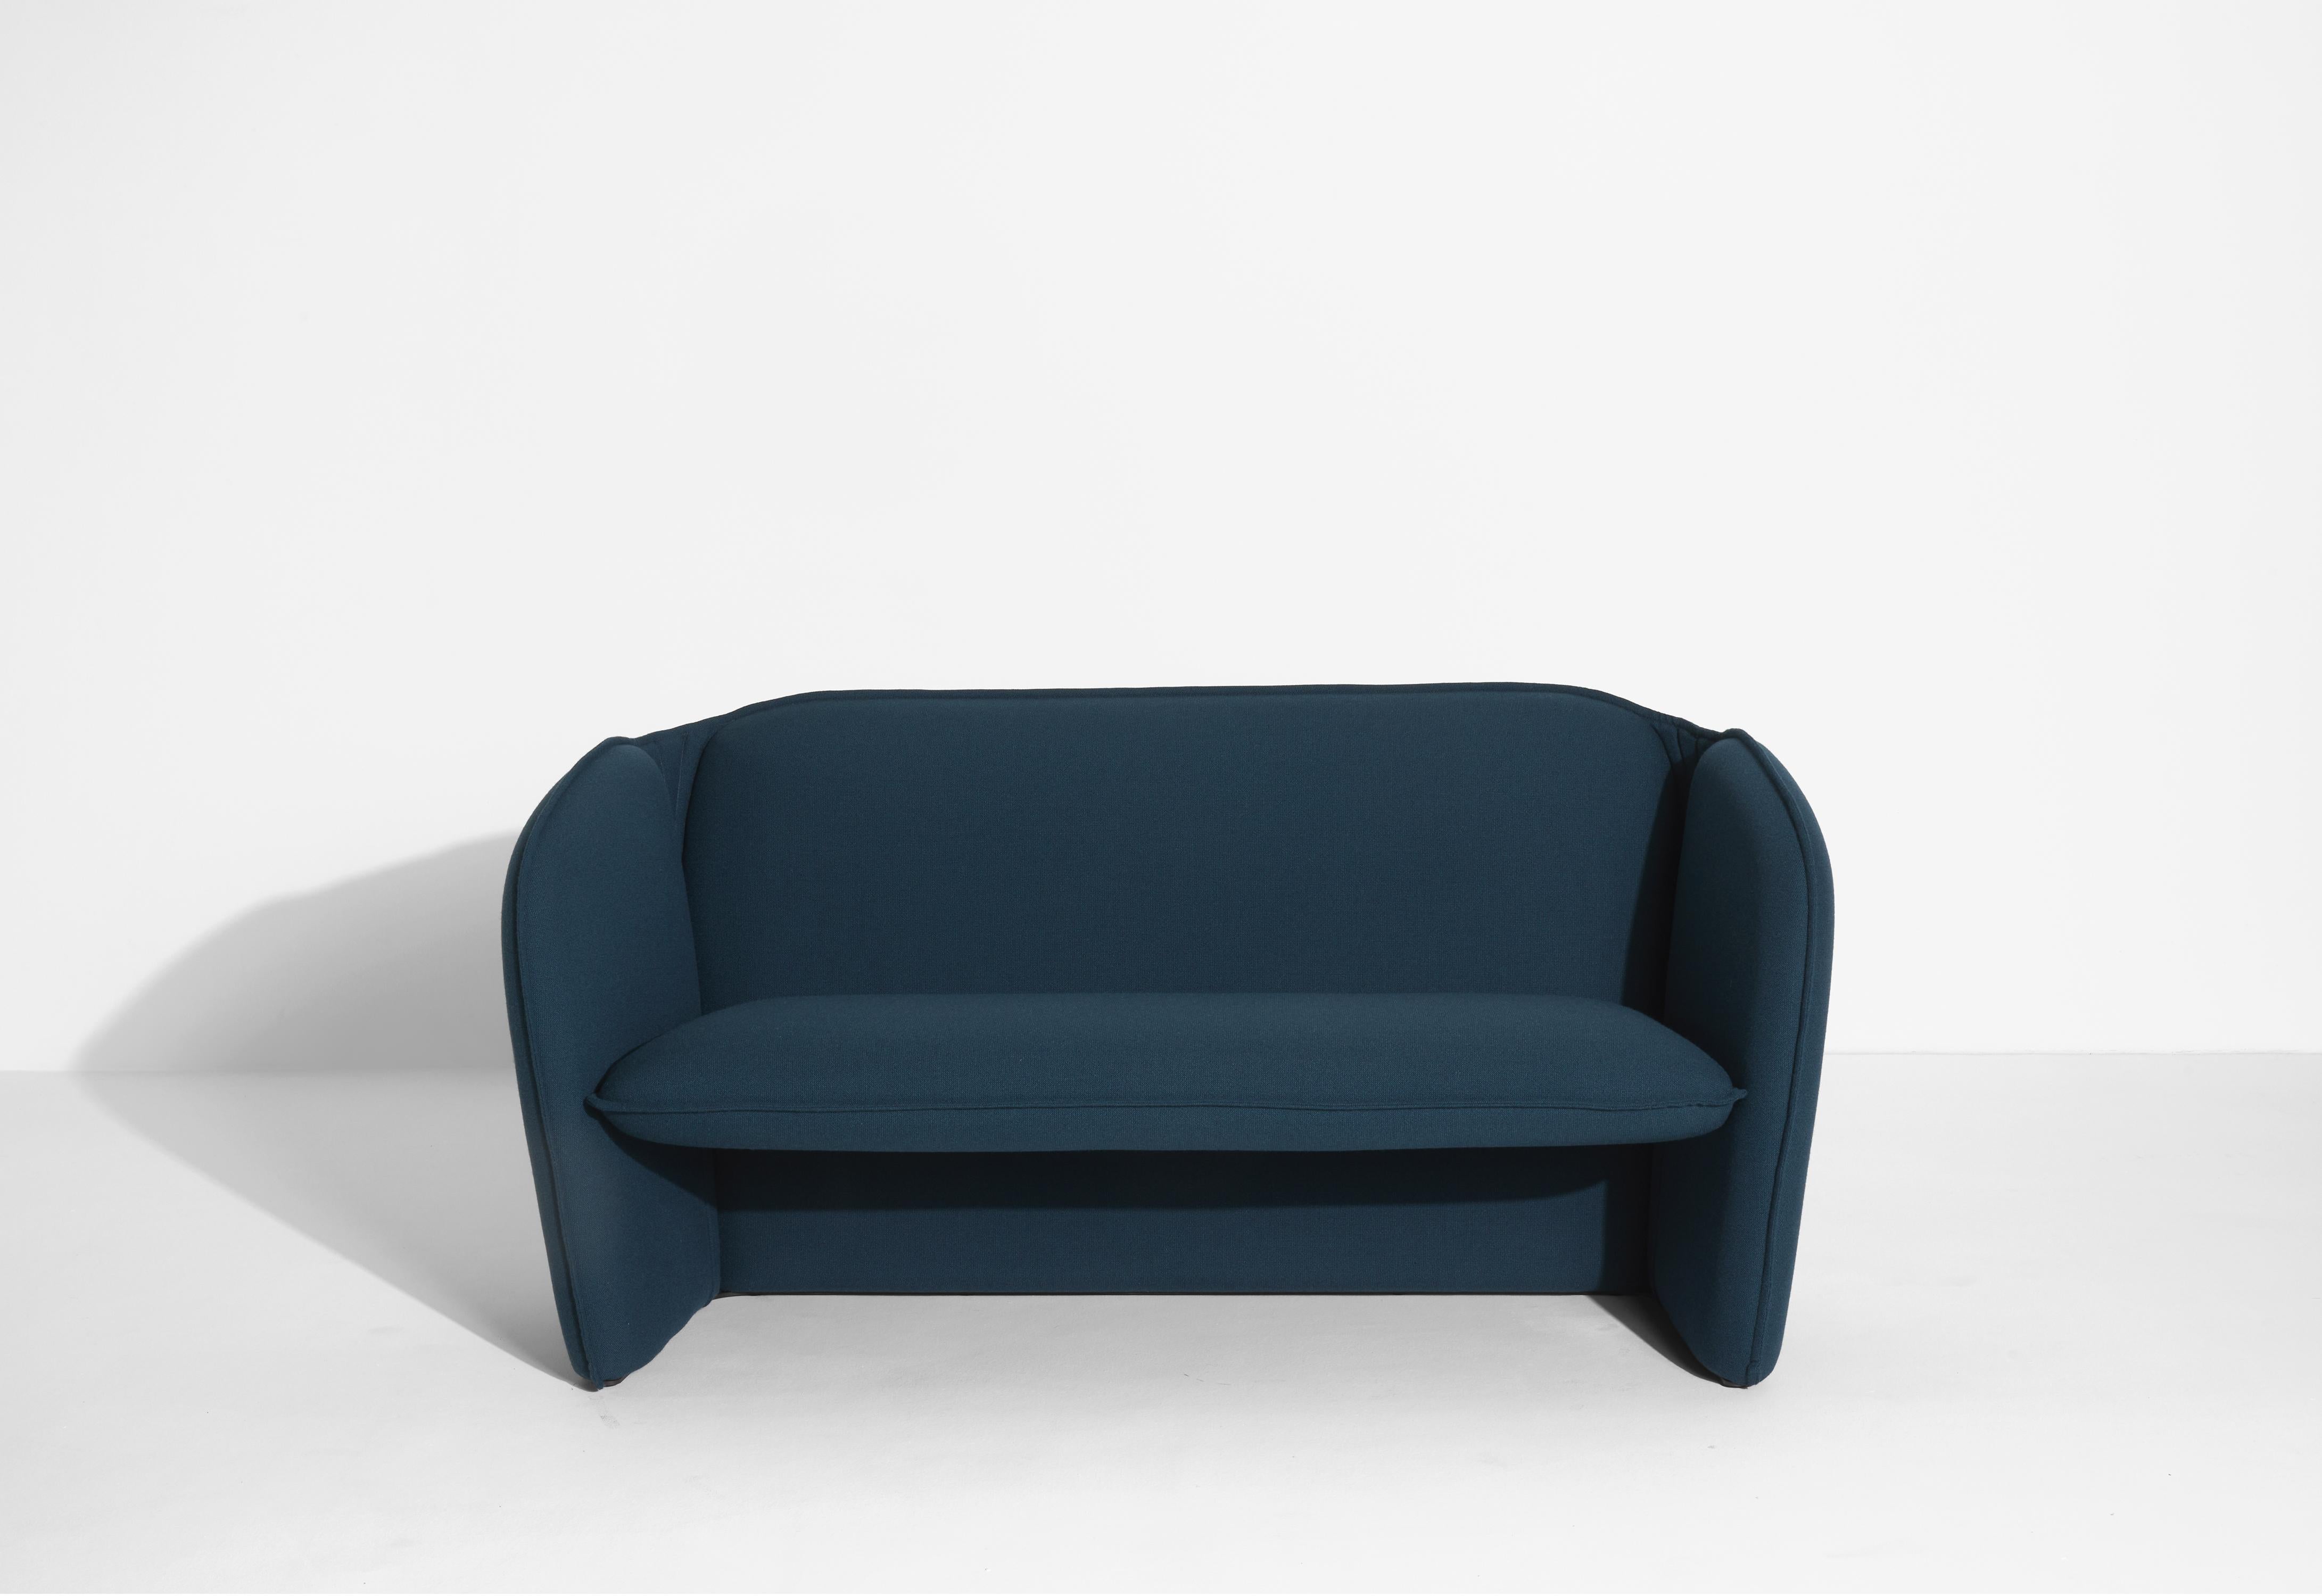 Contemporary Petite Friture Lily Sofa in Navy Blue by Färg & Blanche, 2022 For Sale